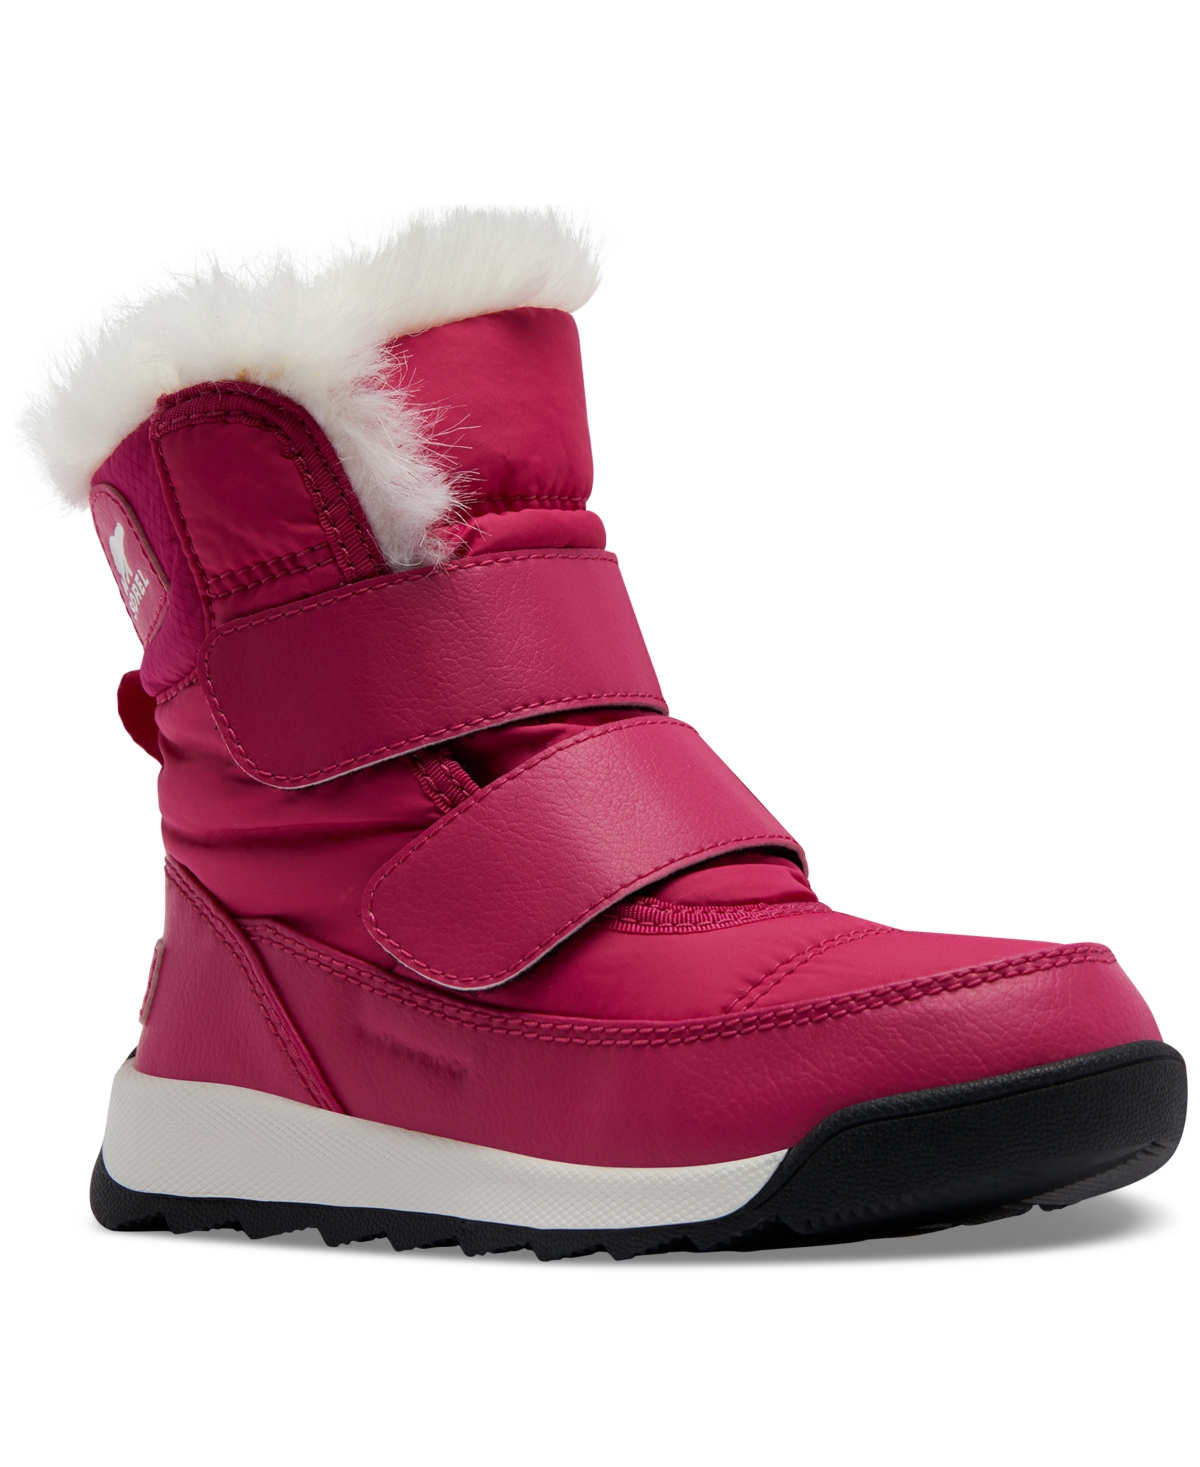 SOREL TODDLERS WHITNEY II STRAP BOOTS WOMEN'S SHOES